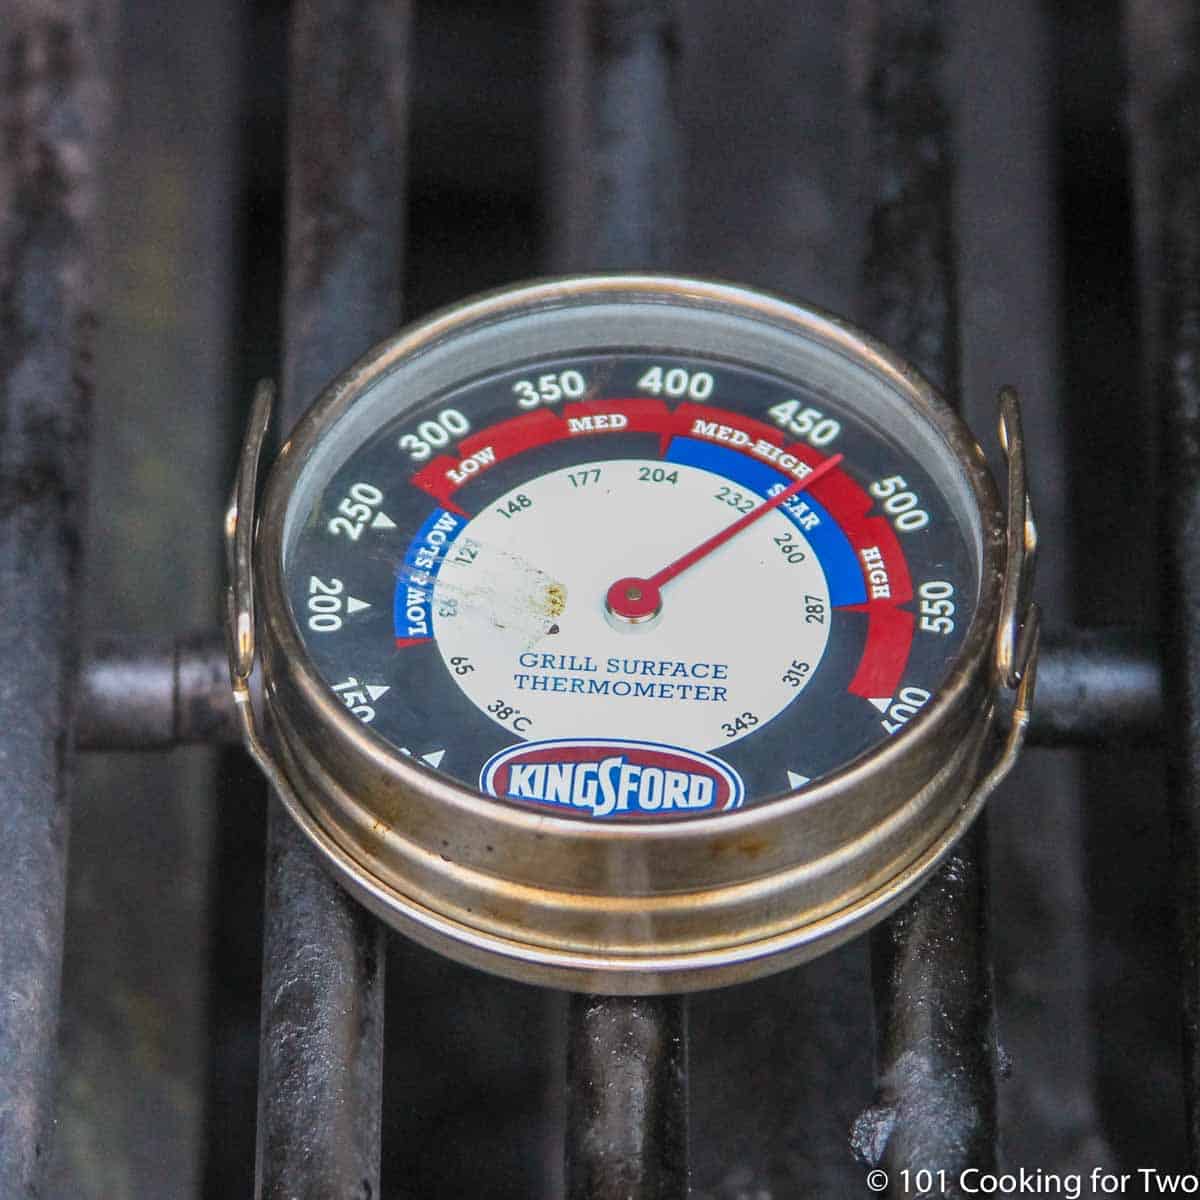 Grill surface thermometer